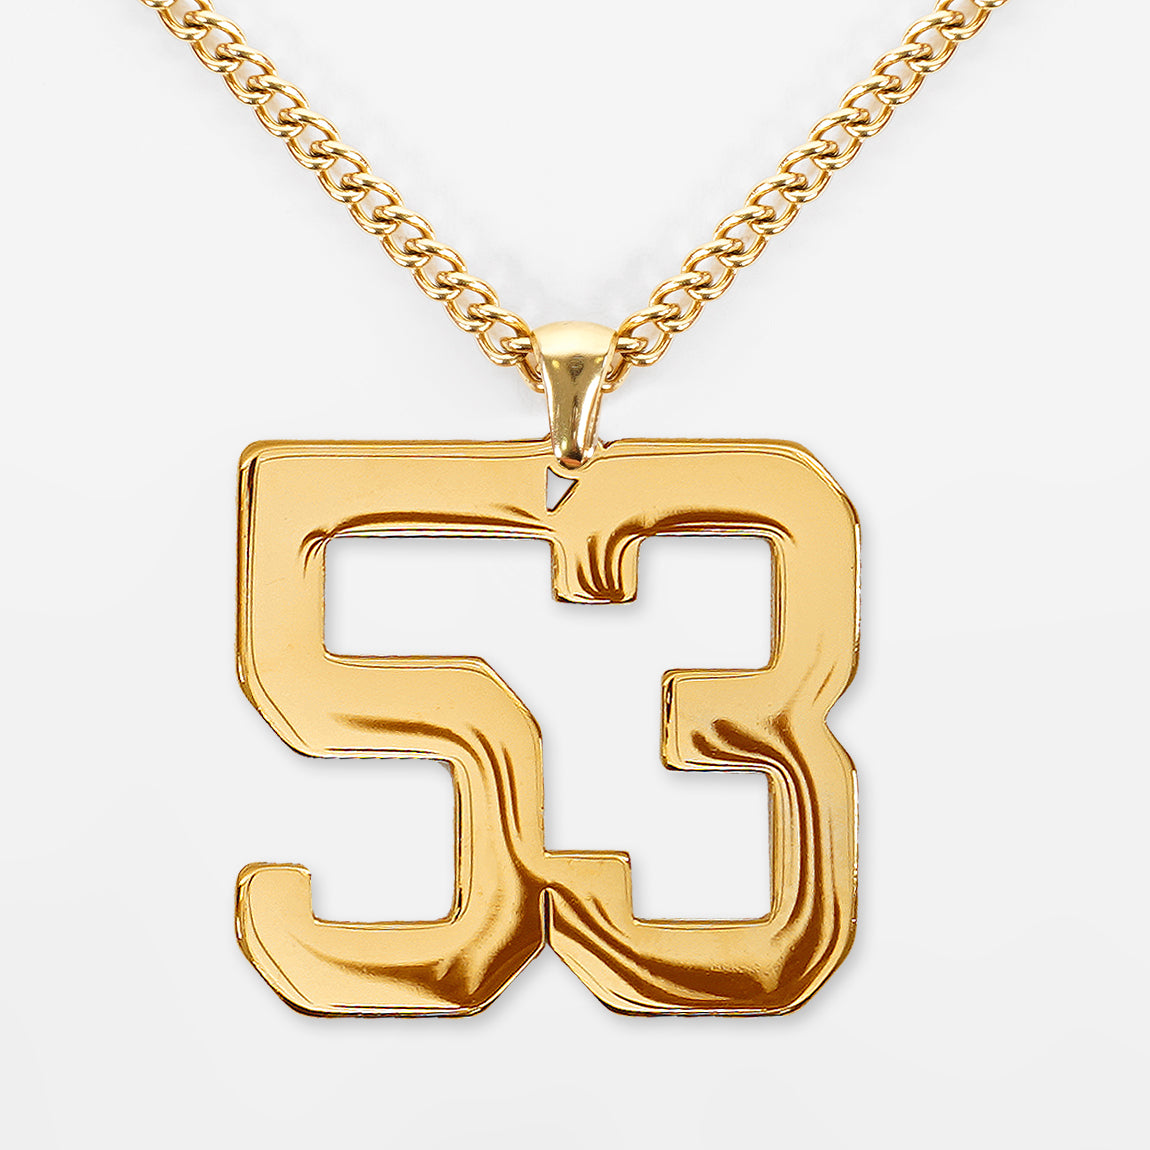 53 Number Pendant with Chain Necklace - Gold Plated Stainless Steel